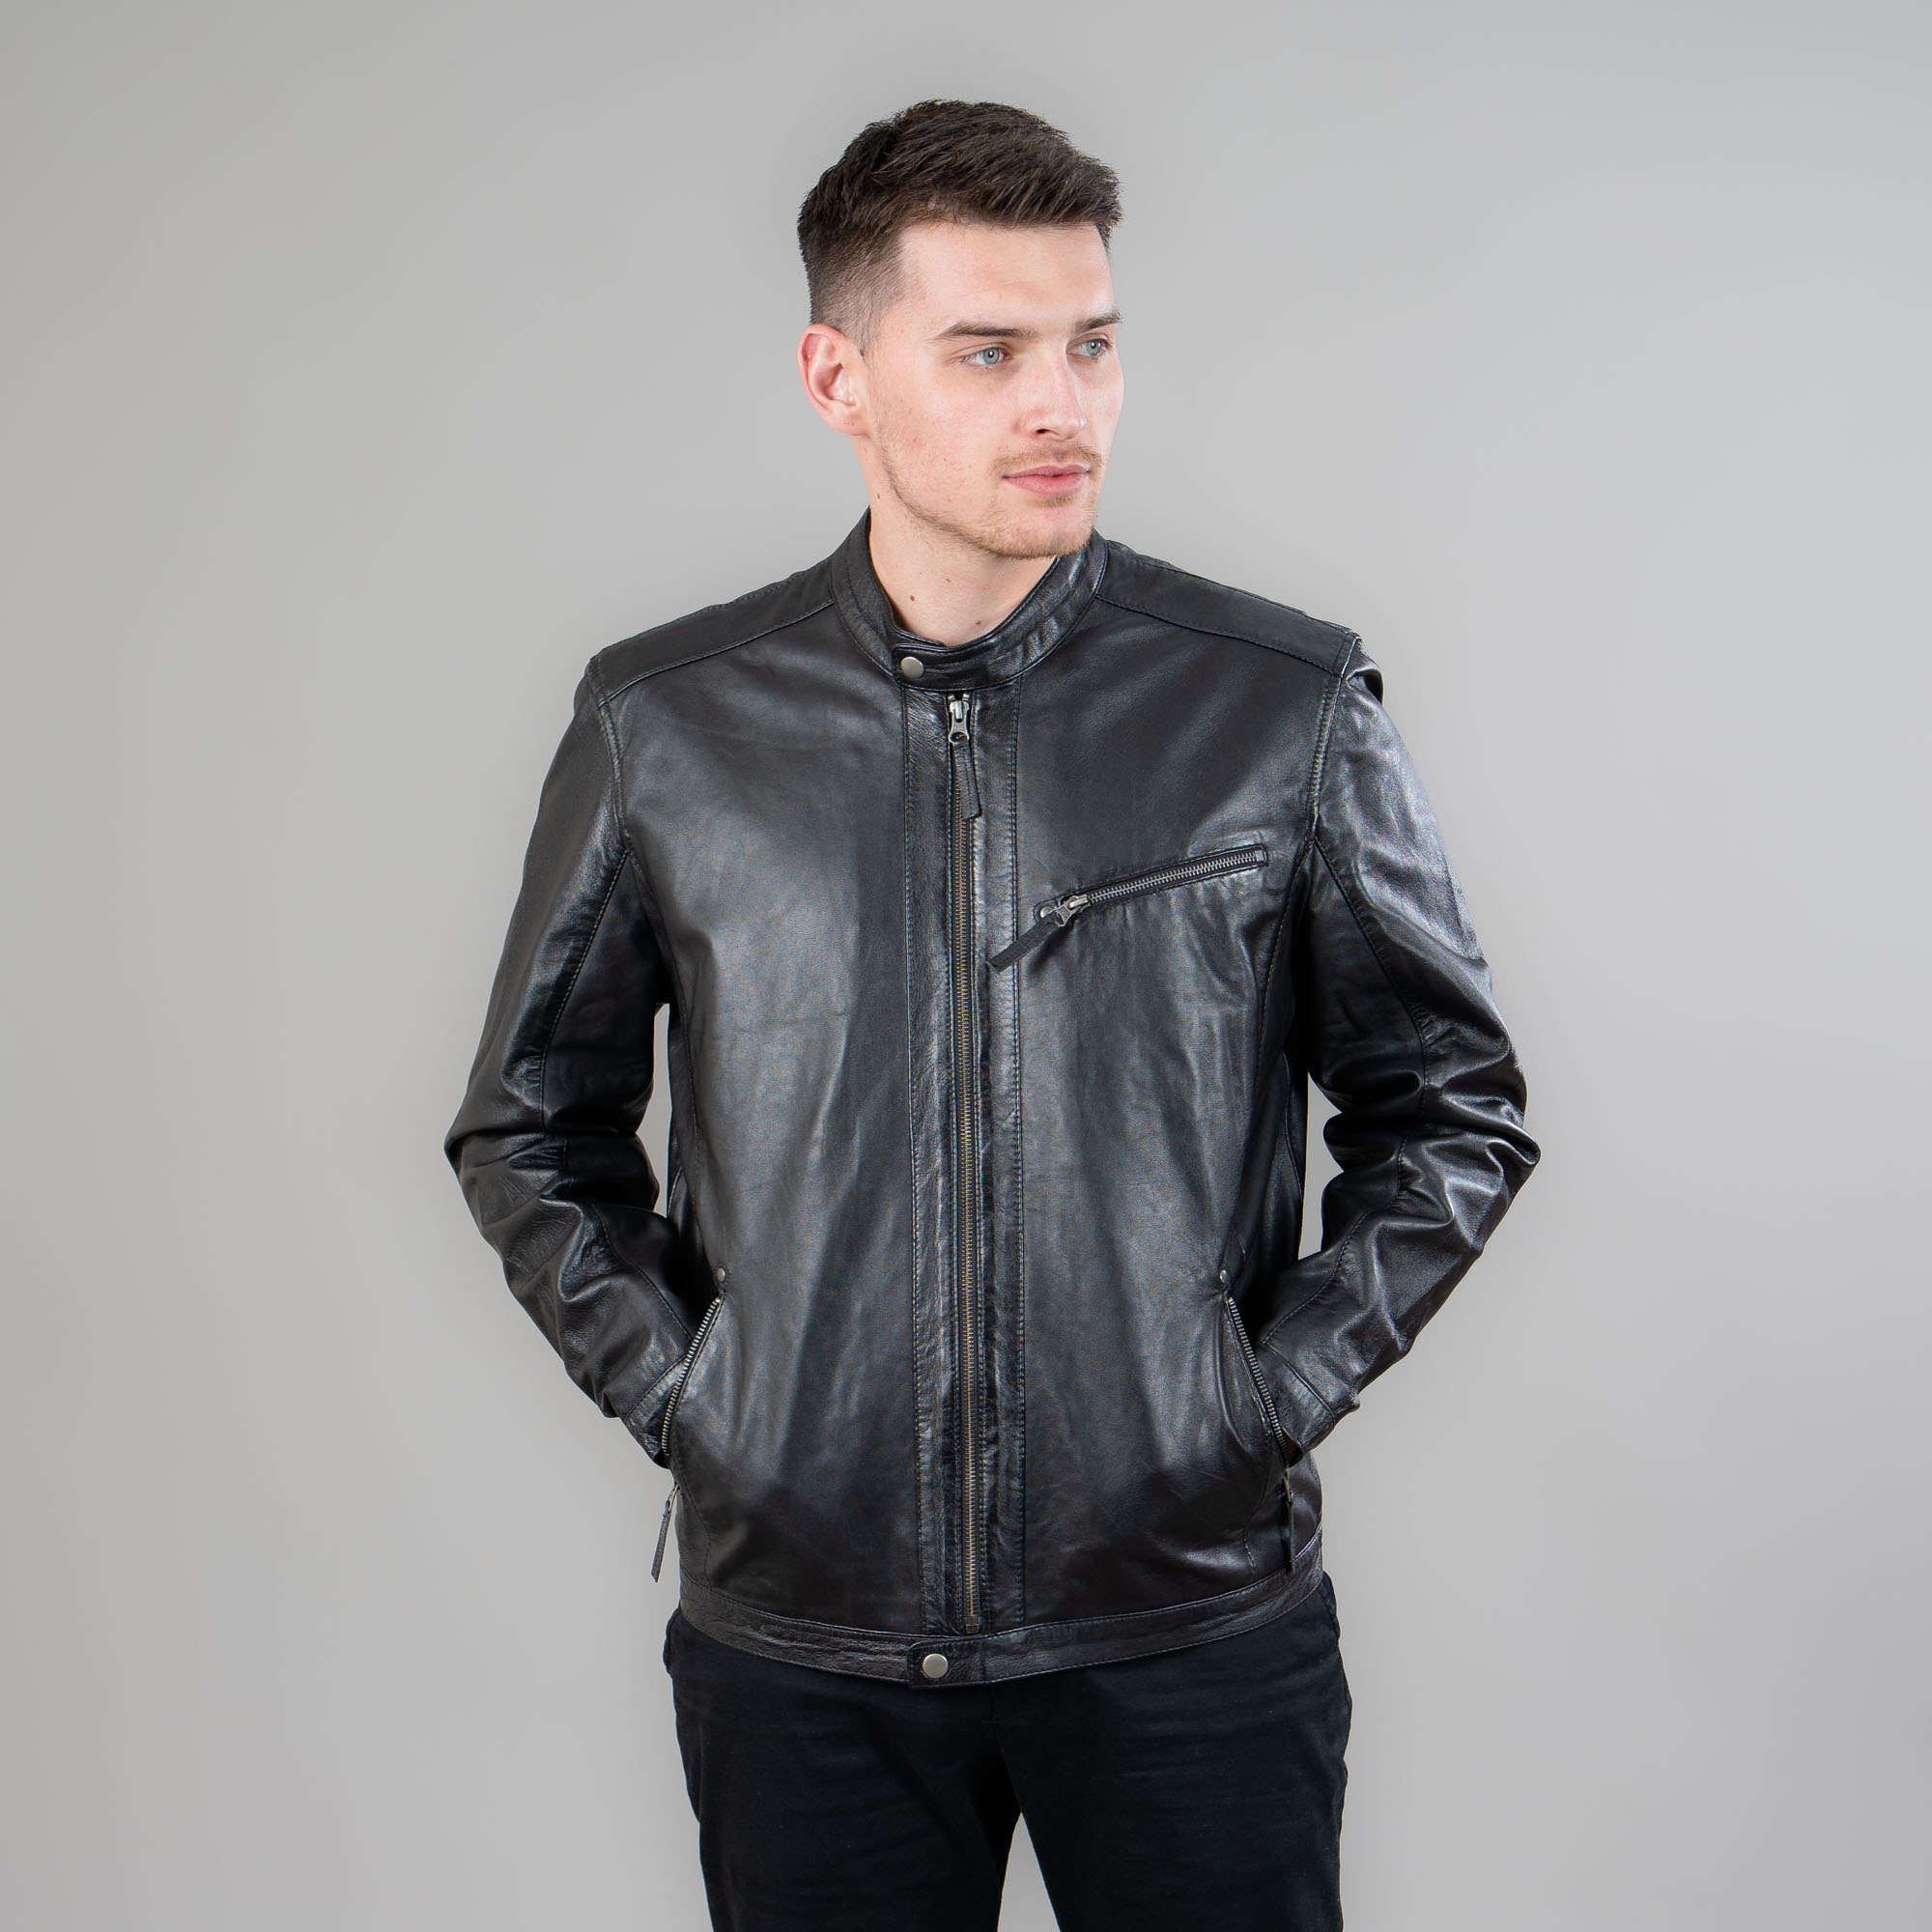 Lambskin jacket in black color with a collar